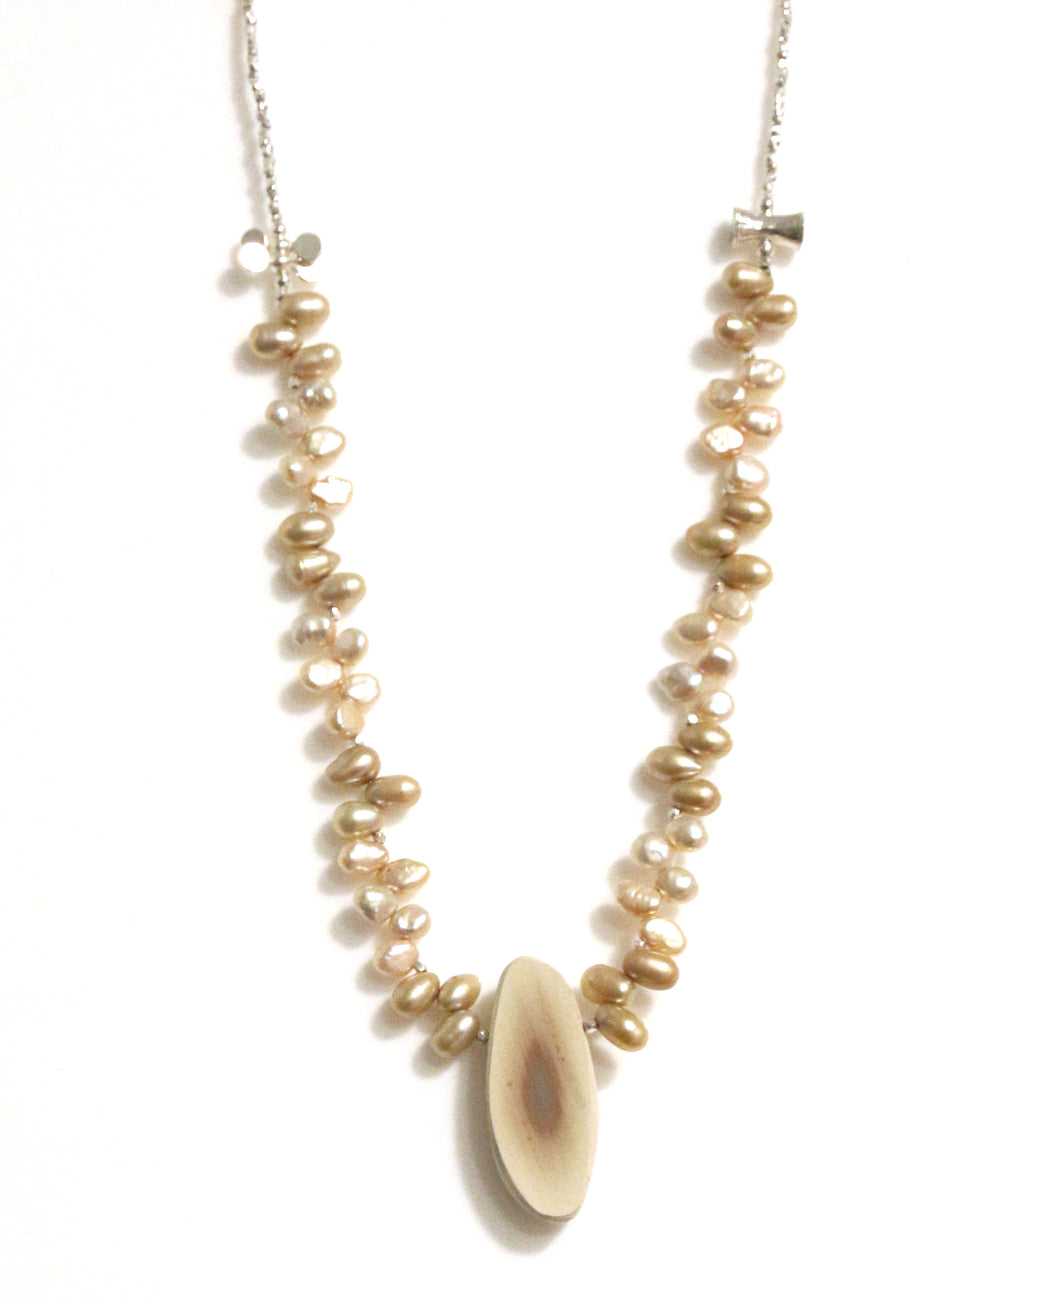 Australian Handmade Keshi Pearl Necklace with Royal Imperial Jasper Pendant and Sterling Silver